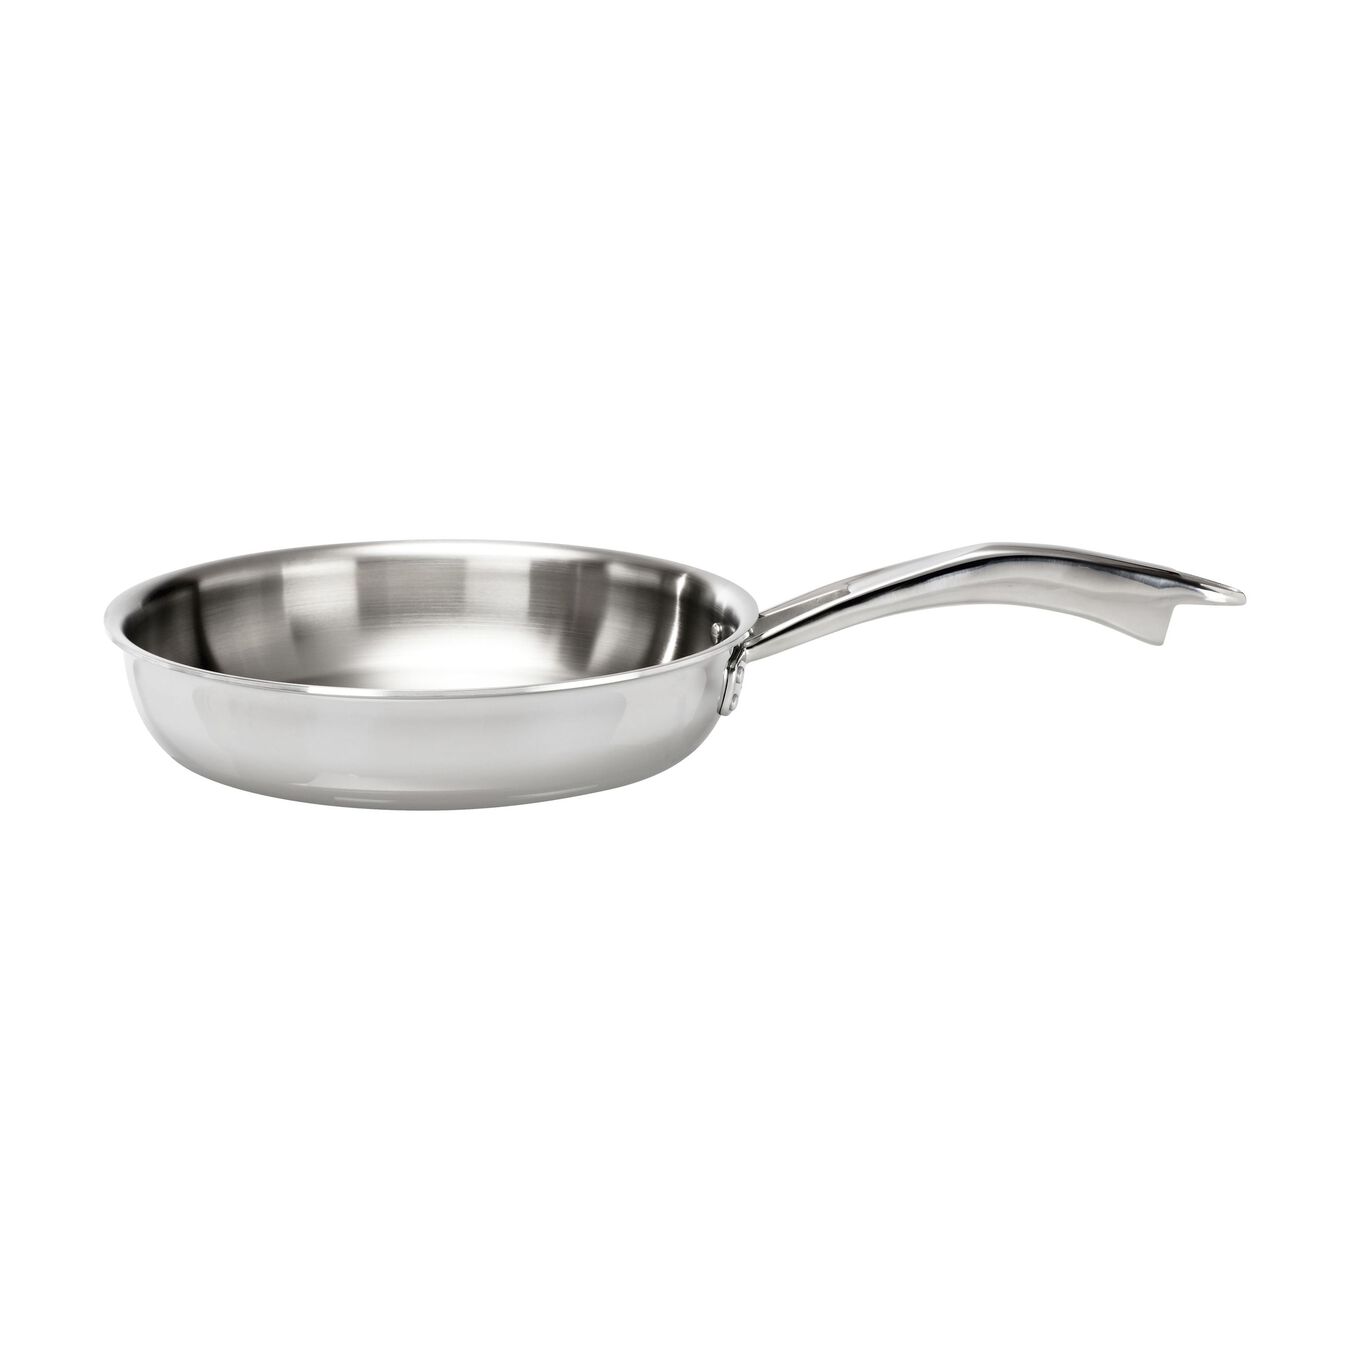 26 cm / 10 inch 18/10 Stainless Steel Frying pan,,large 1